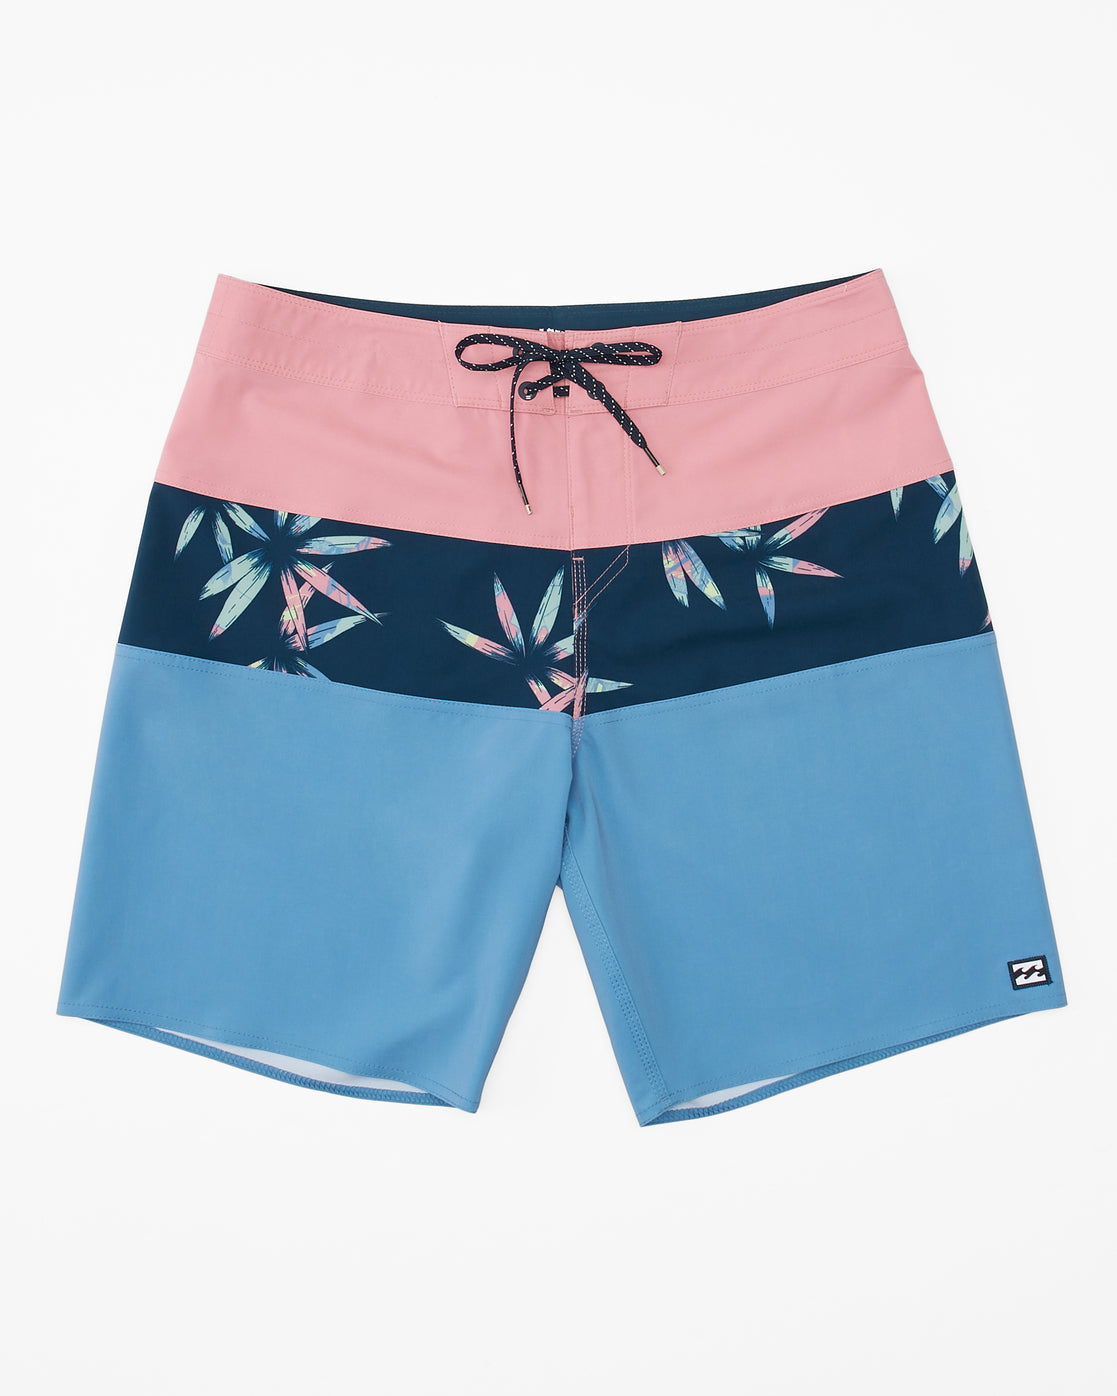 Tribong Pro Boardshorts 19" - ABYBS00243